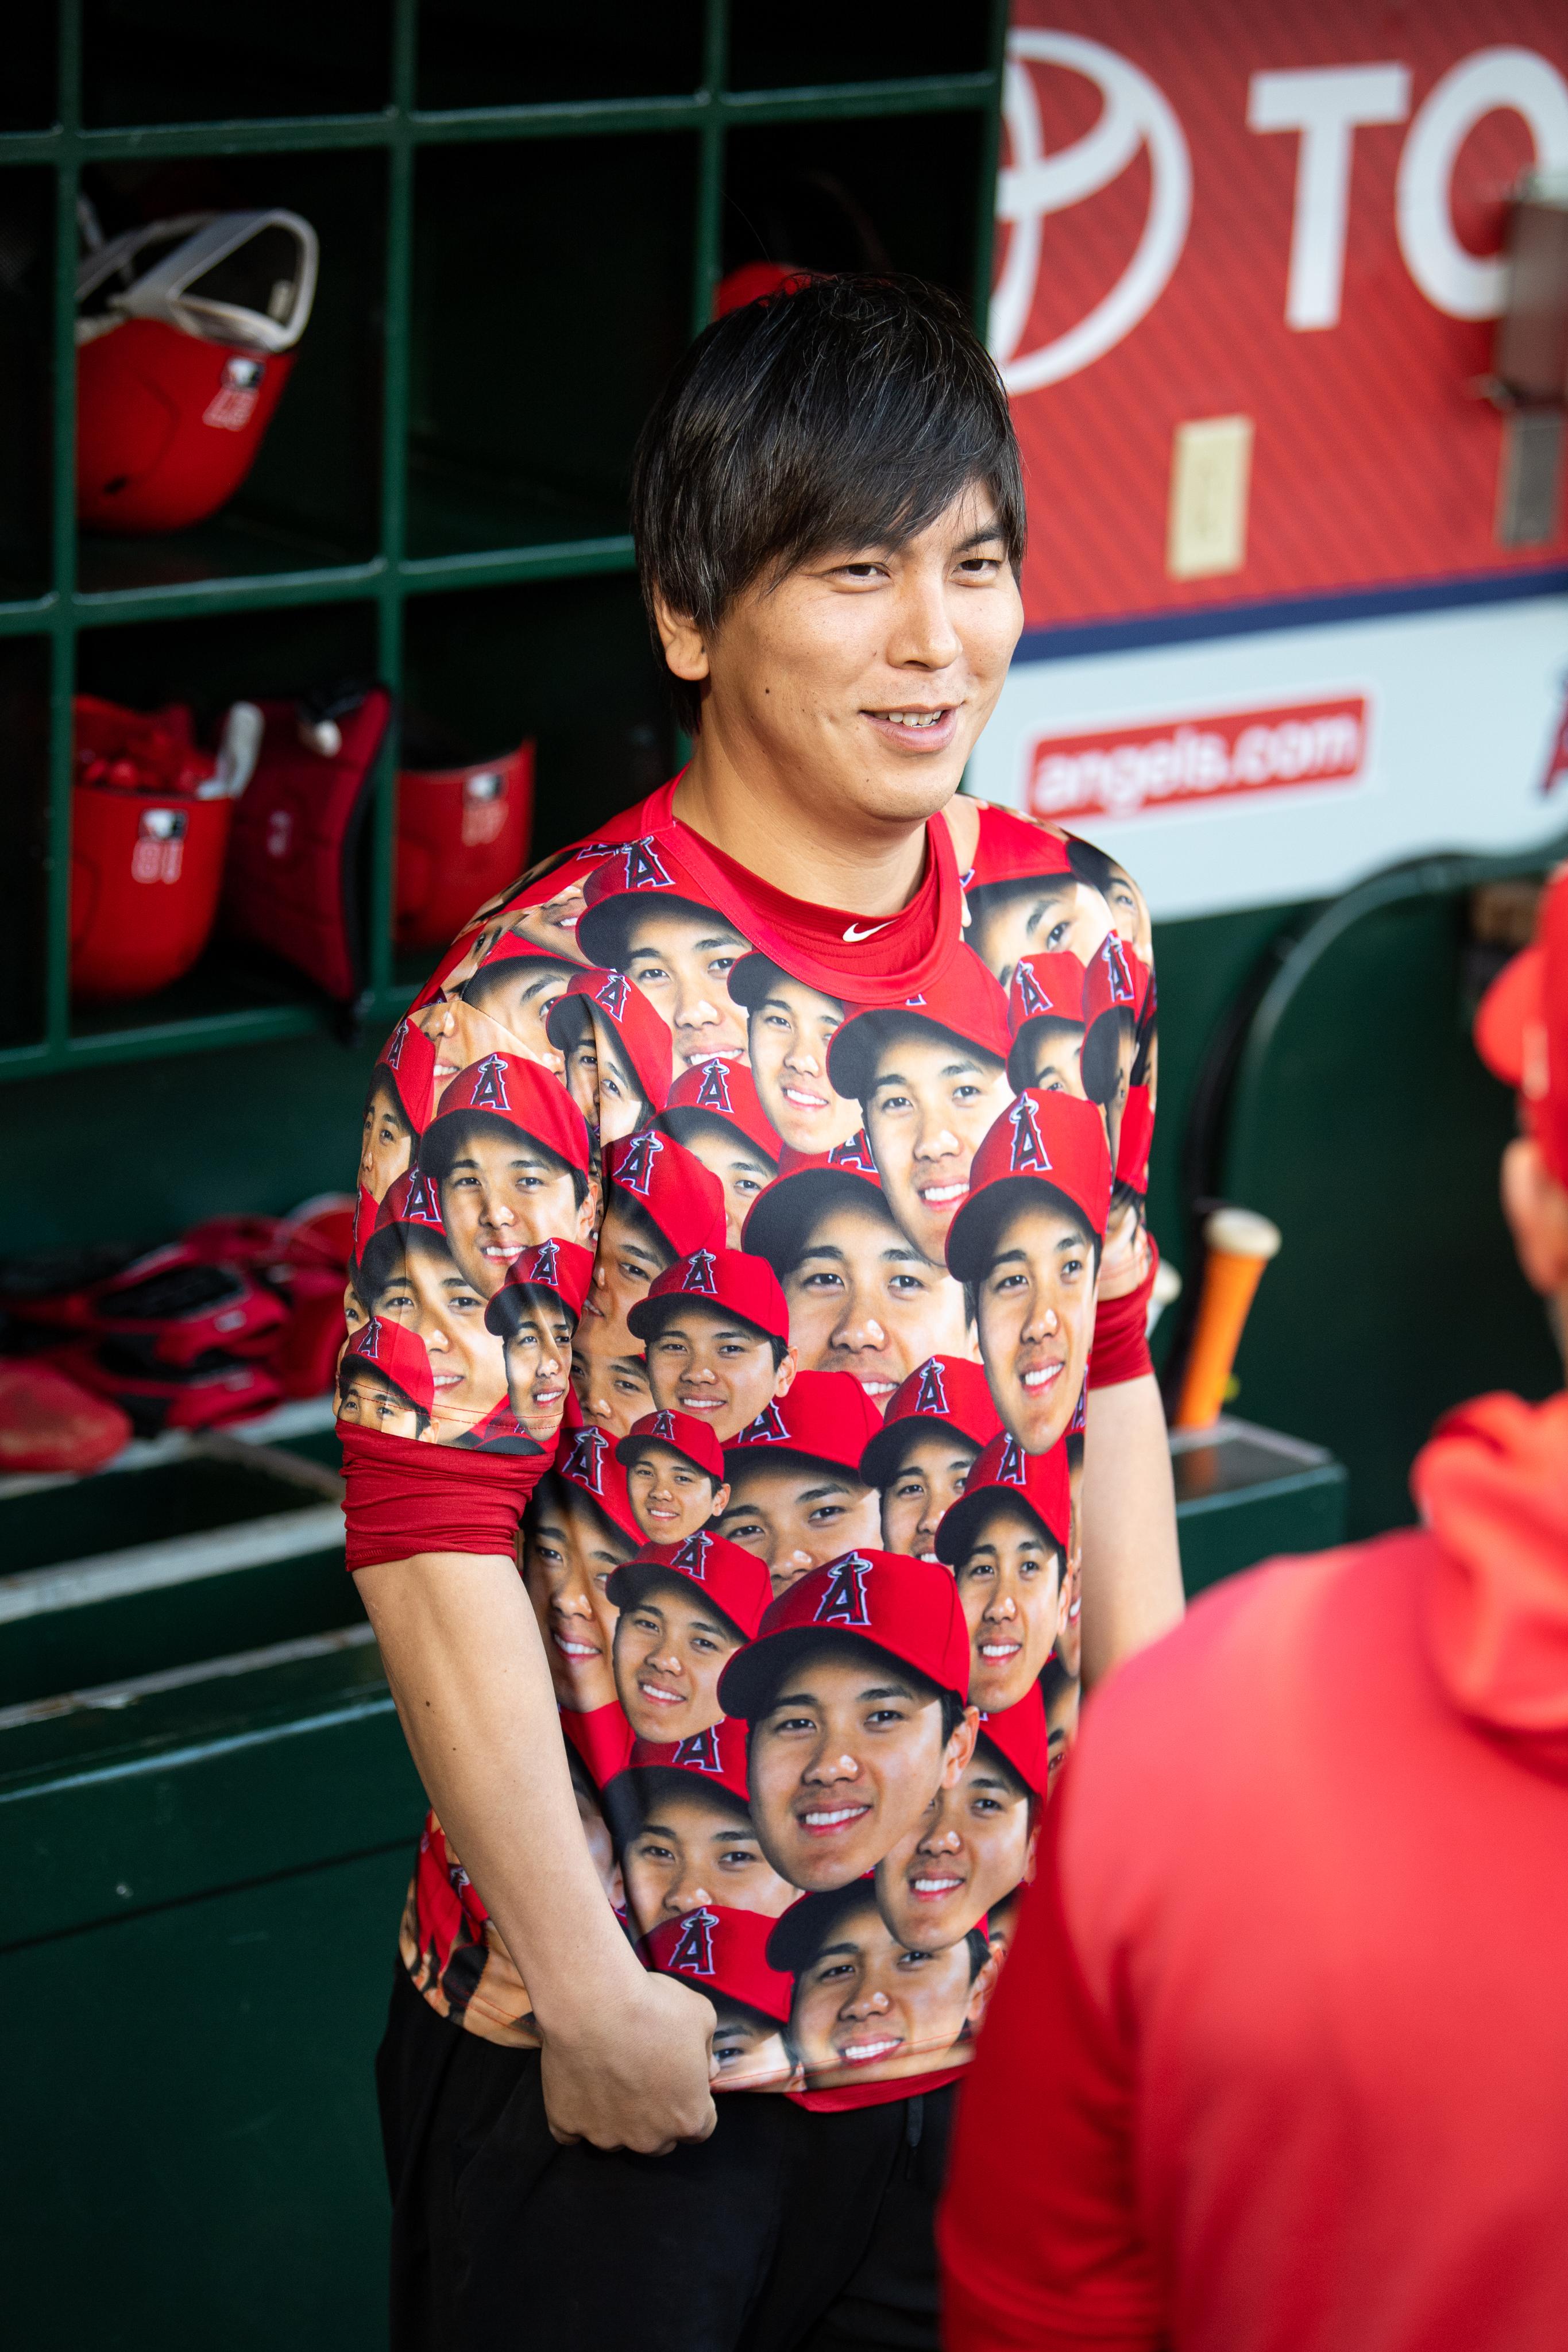 Microbe Græder rygte Los Angeles Angels on Twitter: "Let's 𝙛𝙖𝙘𝙚 it, this is the moment  fashion was born. The first 30,000 fans in attendance on Tuesday, September  24th will receive this Ippei-approved Ohtani Shirt, presented